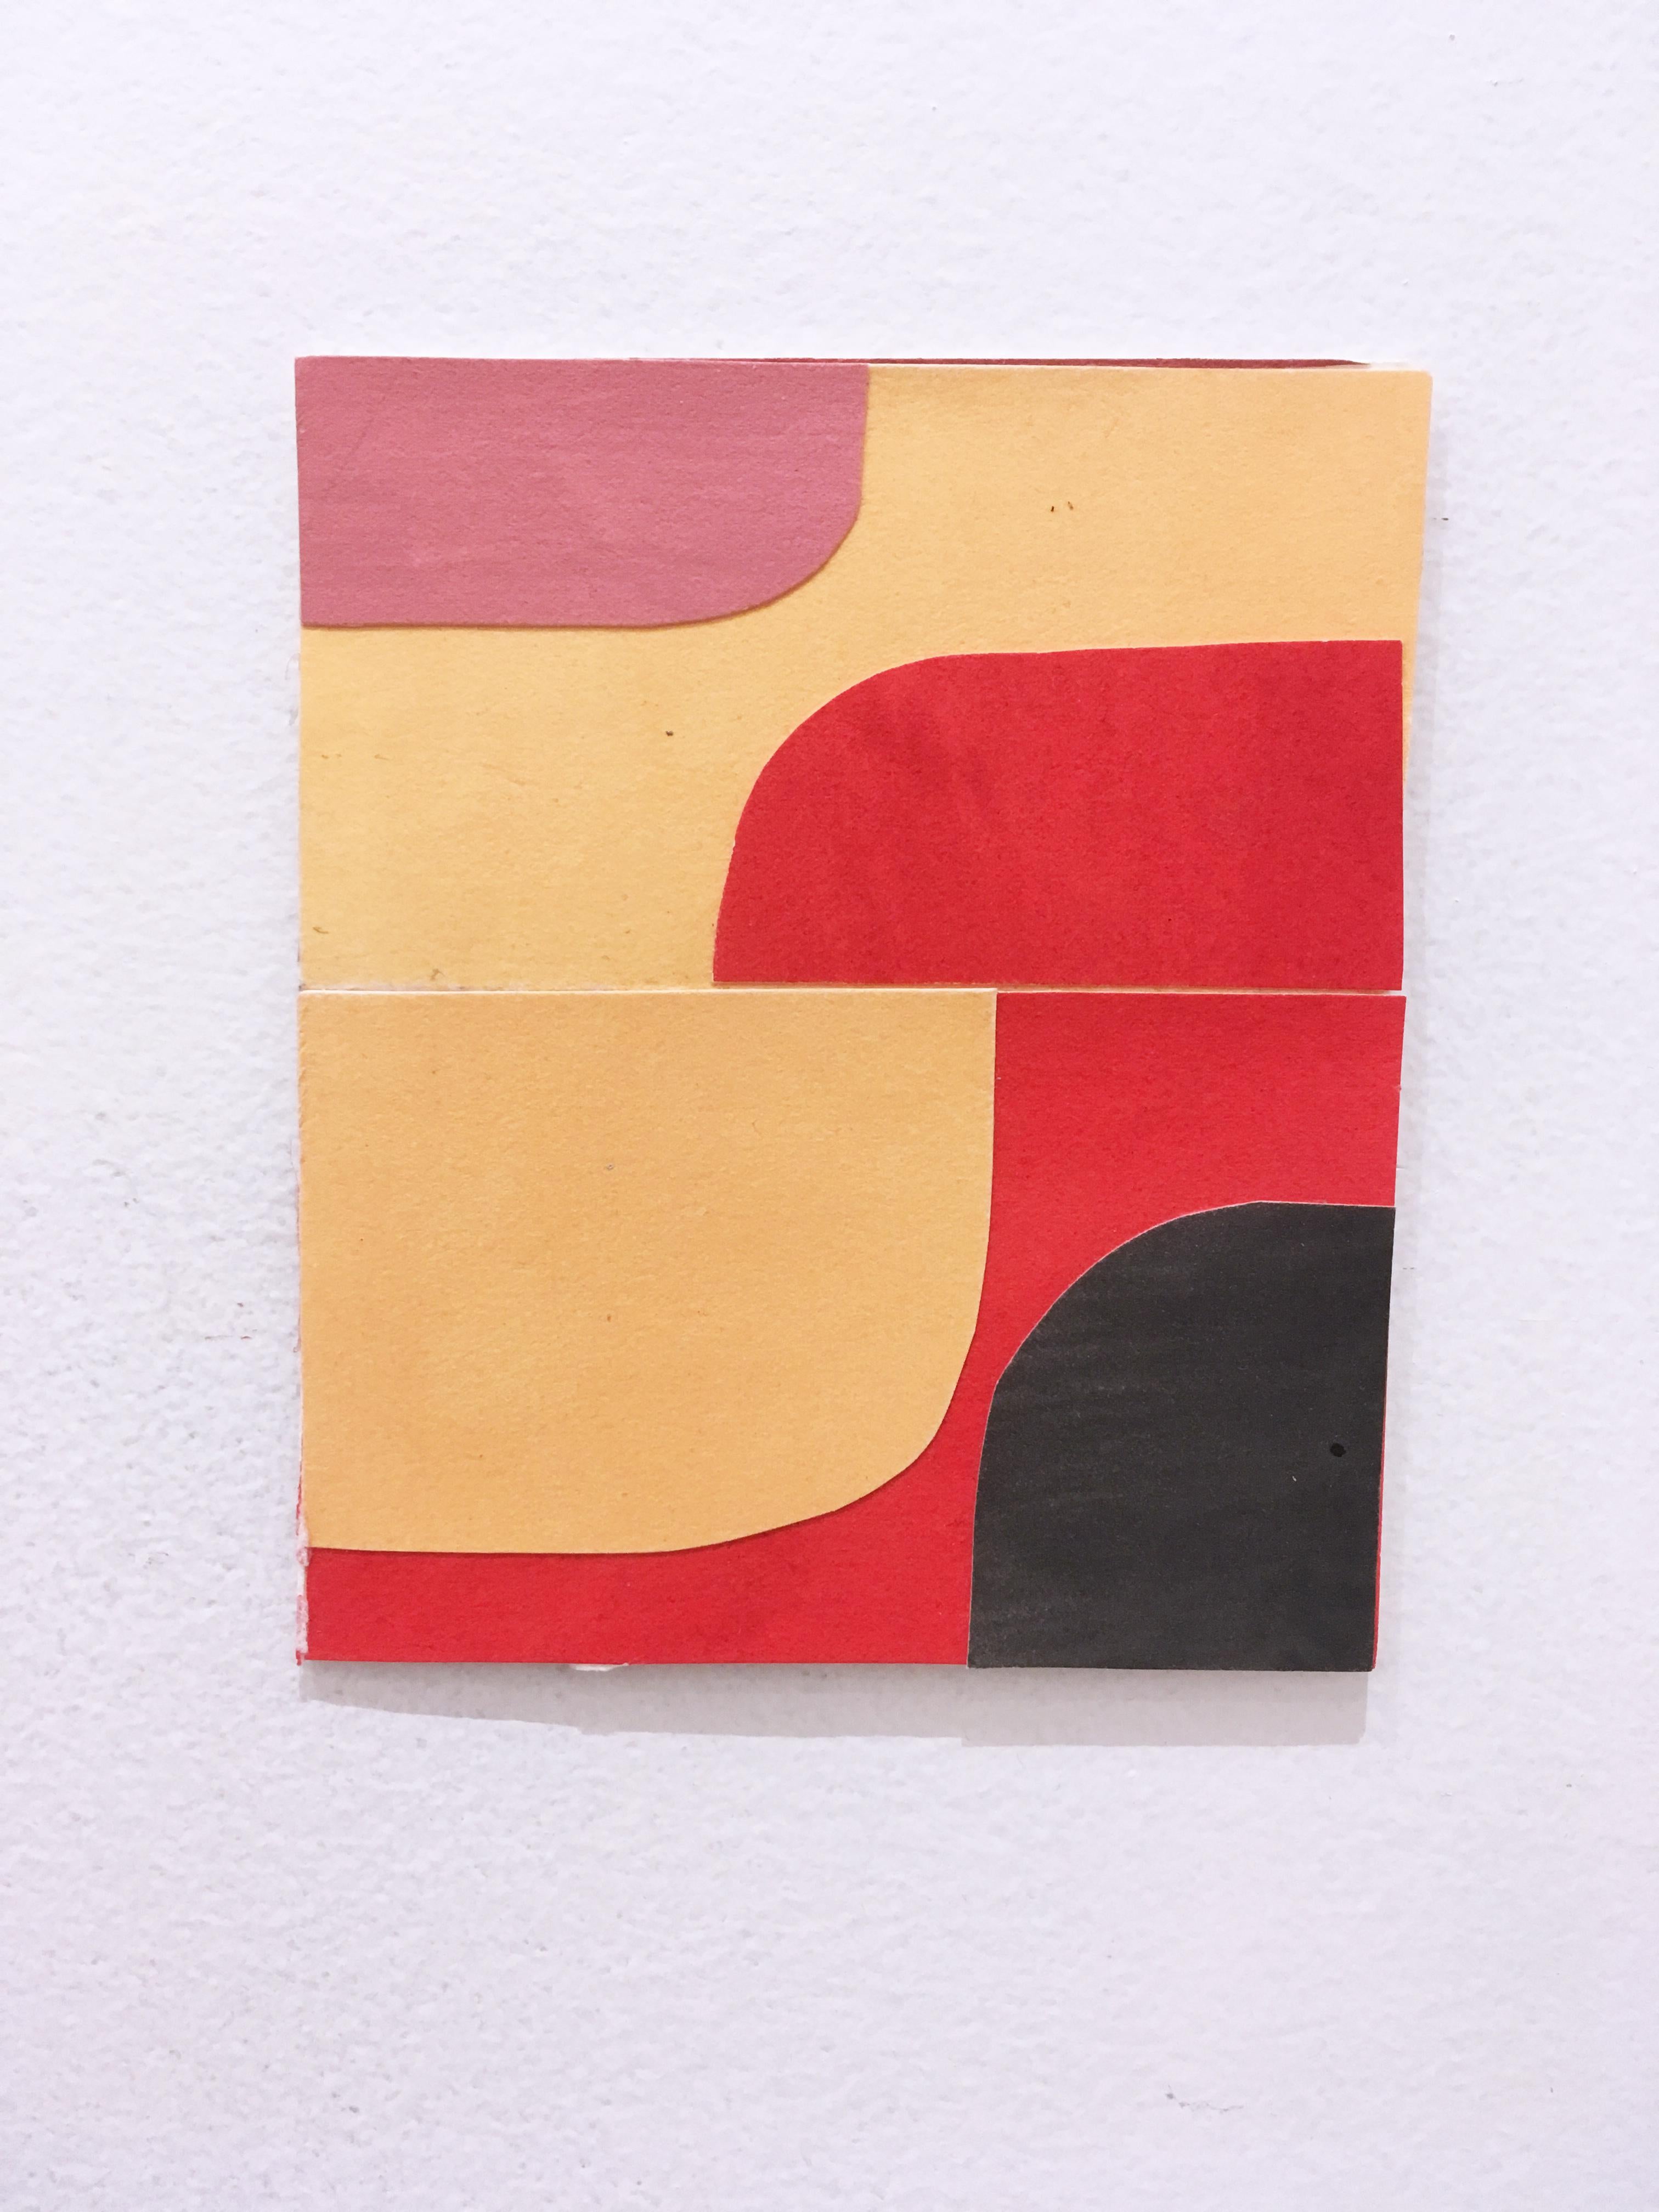 Andrew Zimmerman Abstract Painting - Scaled to Size 14, 2018, collage, acrylic on paper, red, pink, yellow